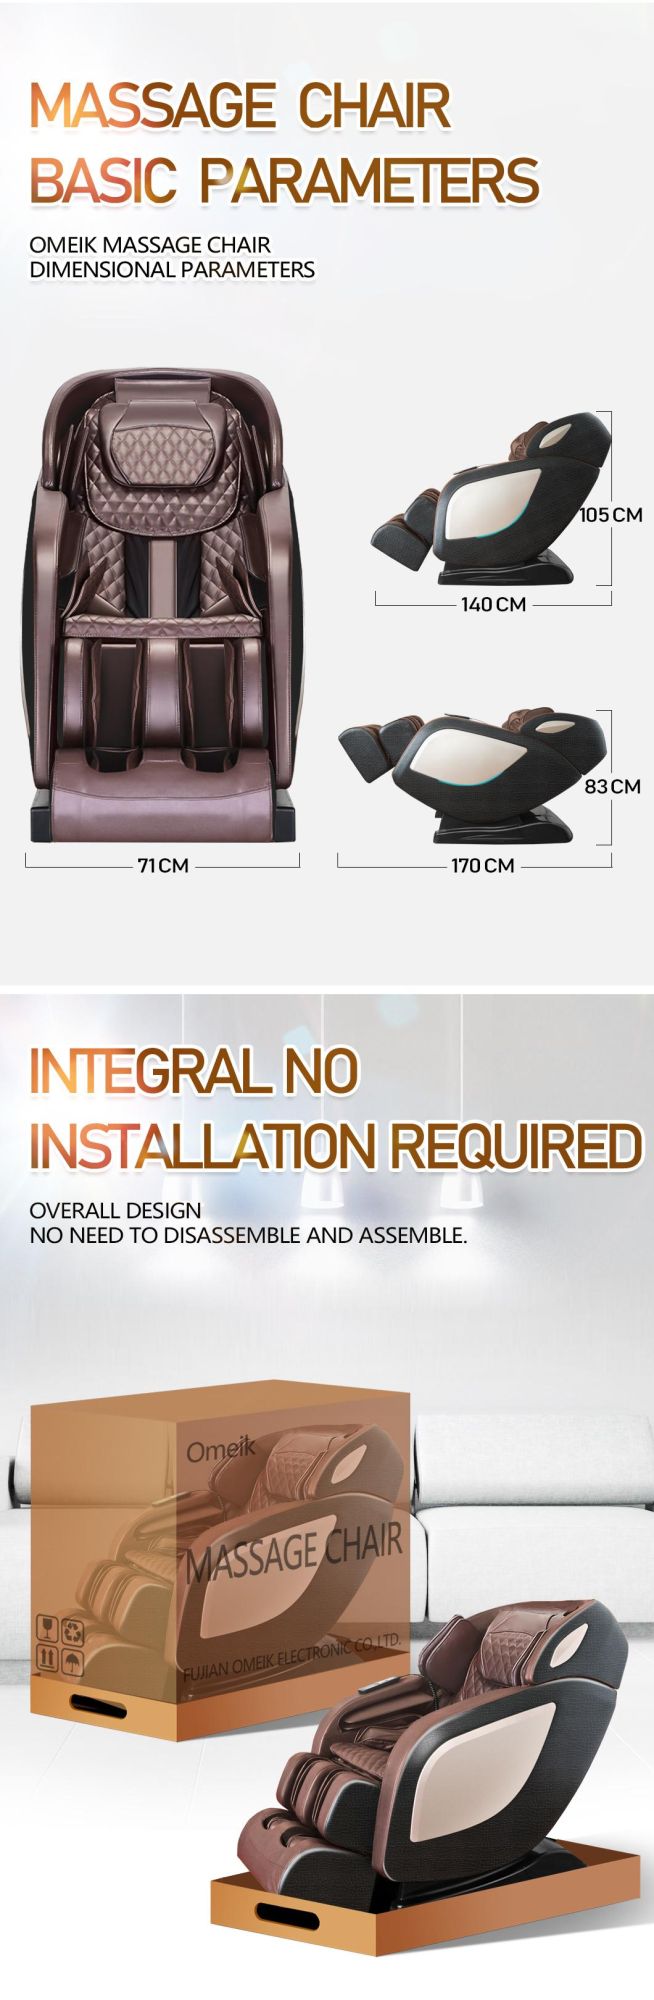 4D Intelligent Rocking Motion Double SL Track Automatic Modes Arm Sync Moving Rolling Massage Chair with 3D Mechanism